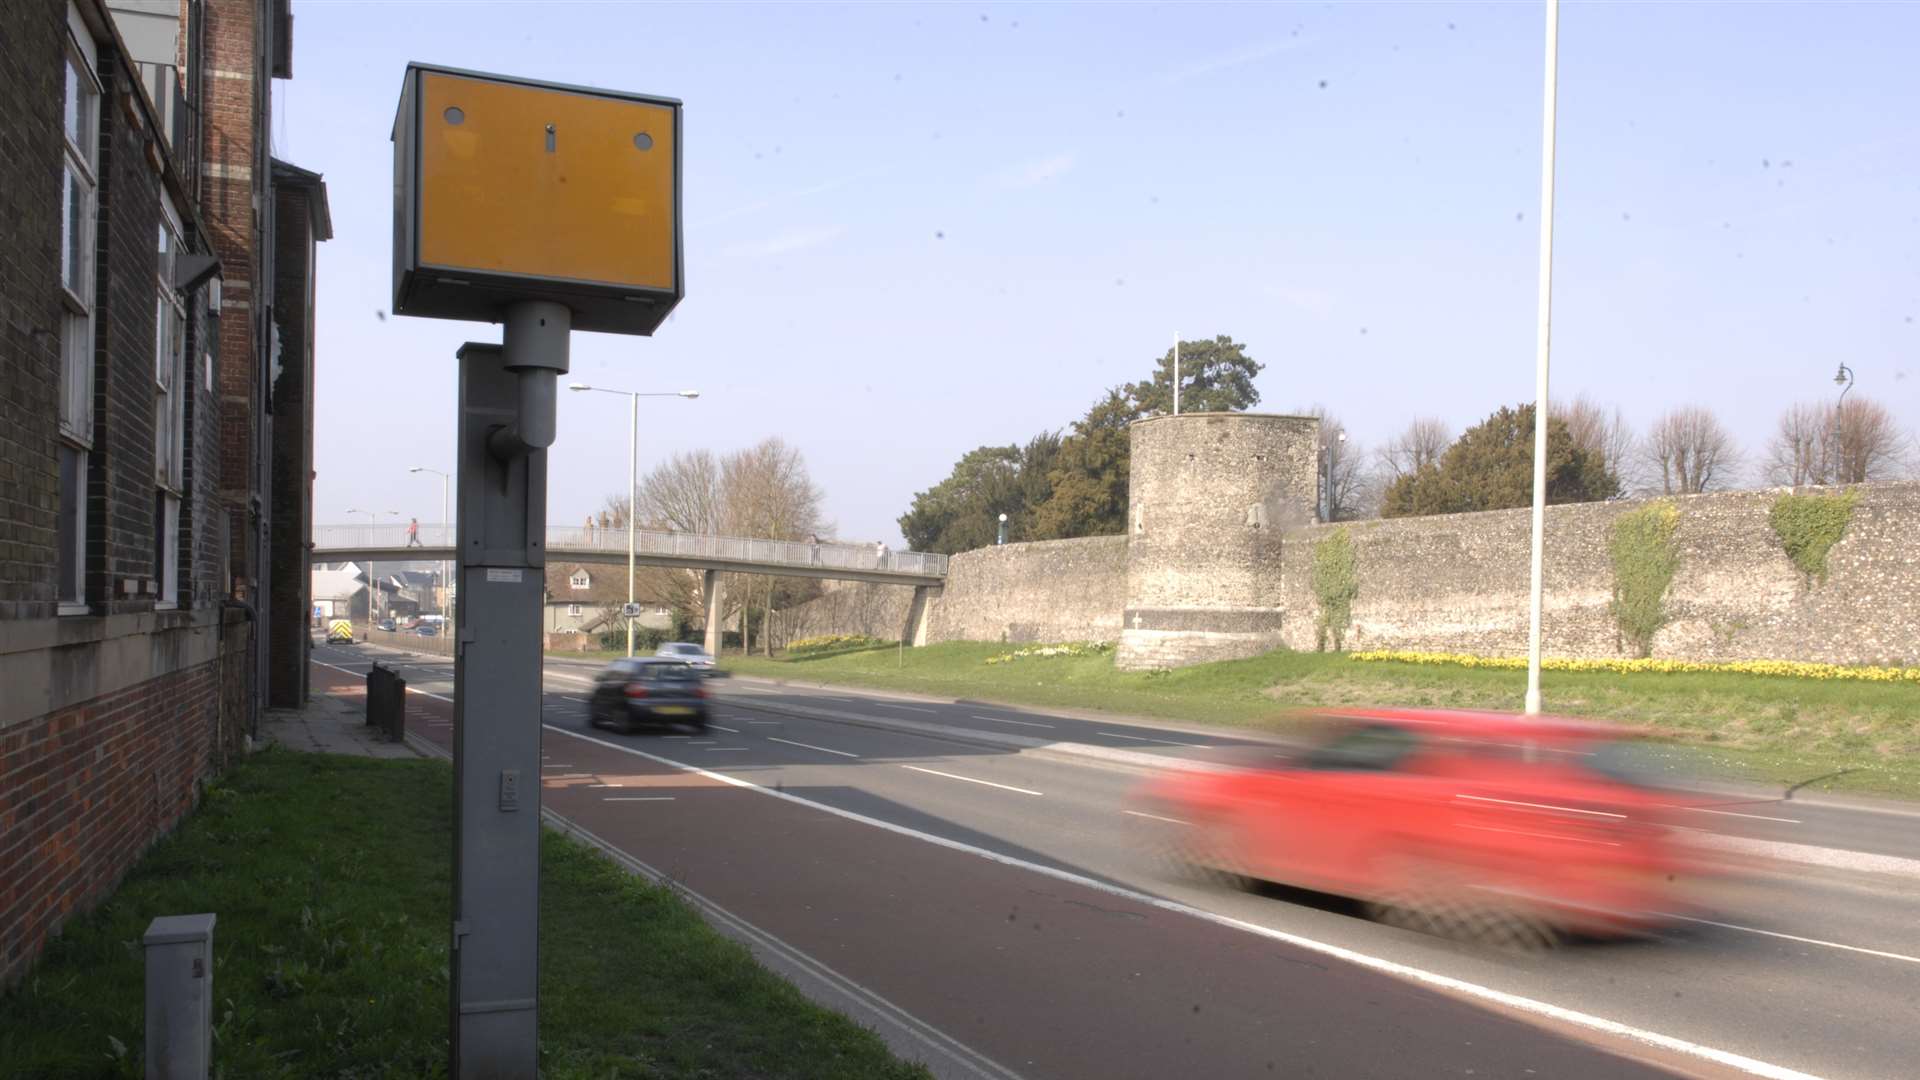 Most speed cameras in Kent are inactive, according to data